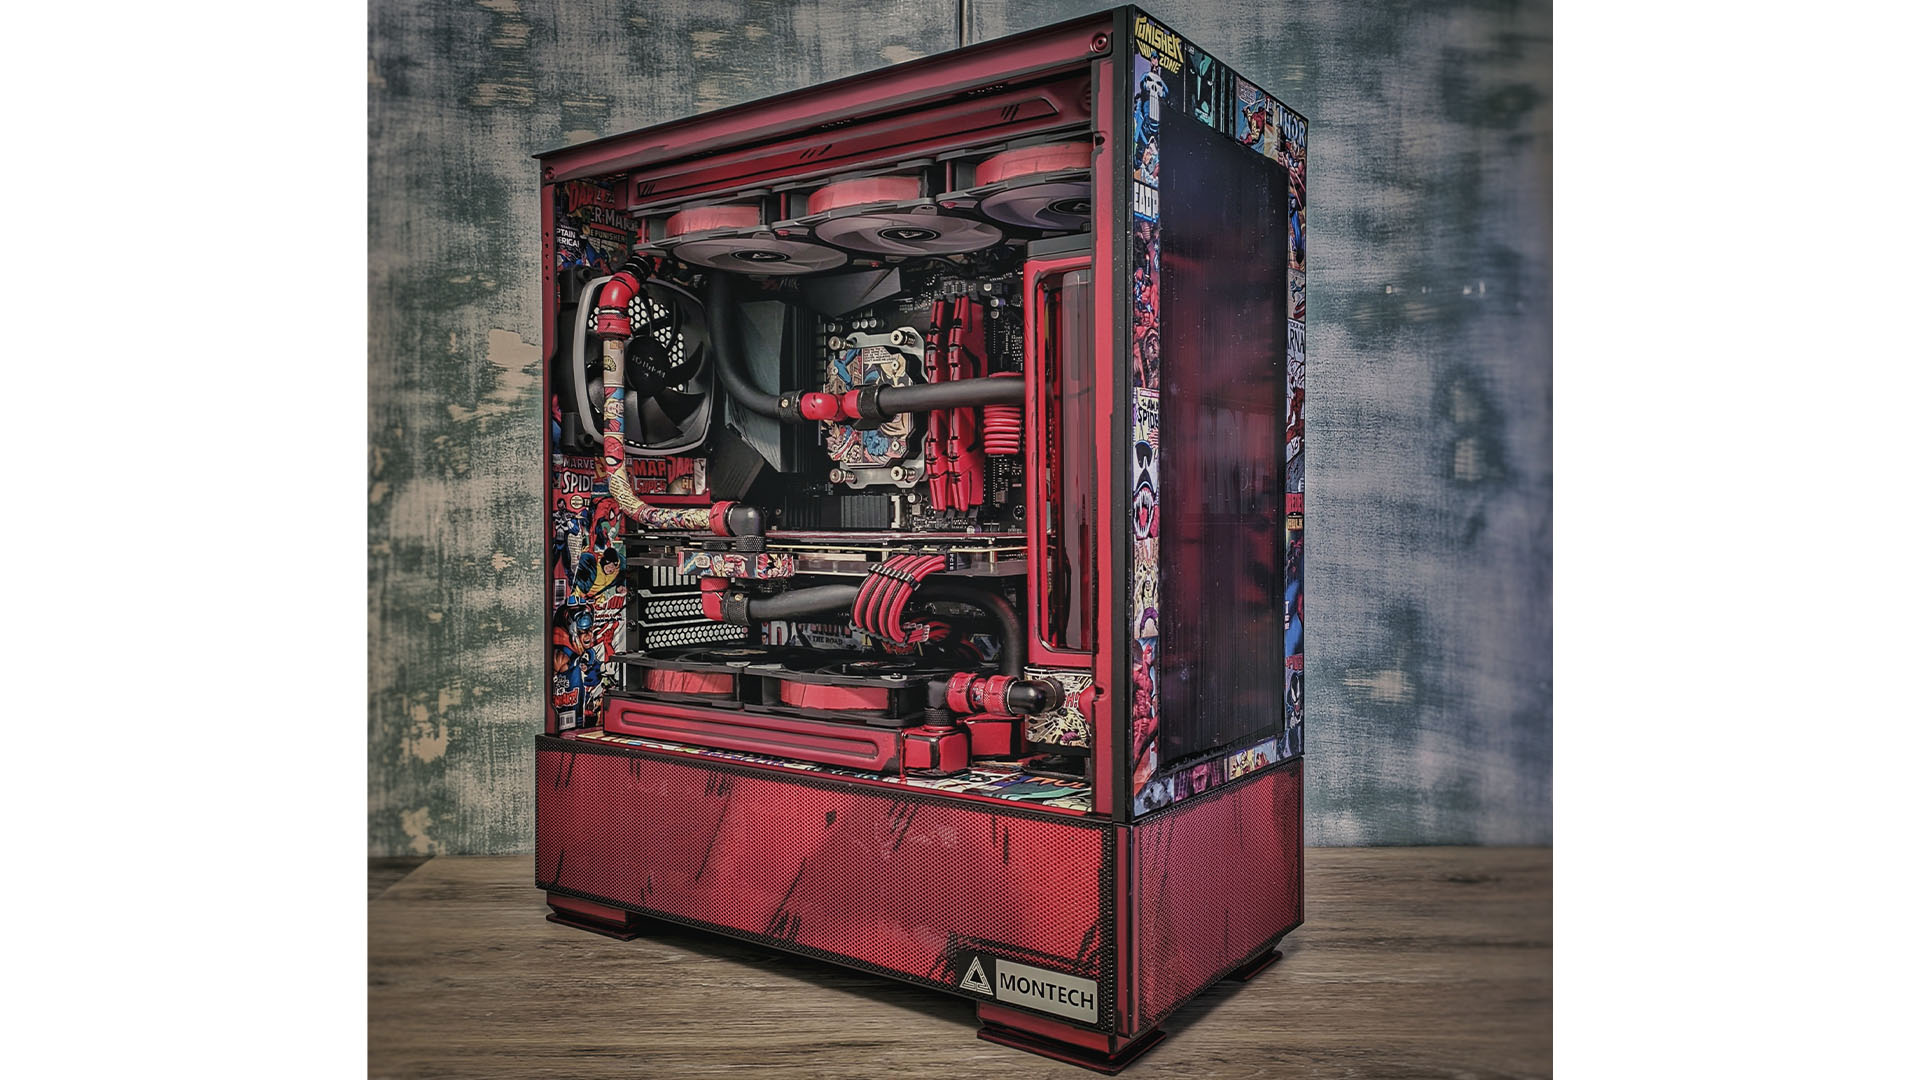 The Marvel-themed comic book gaming PC with its side panel off